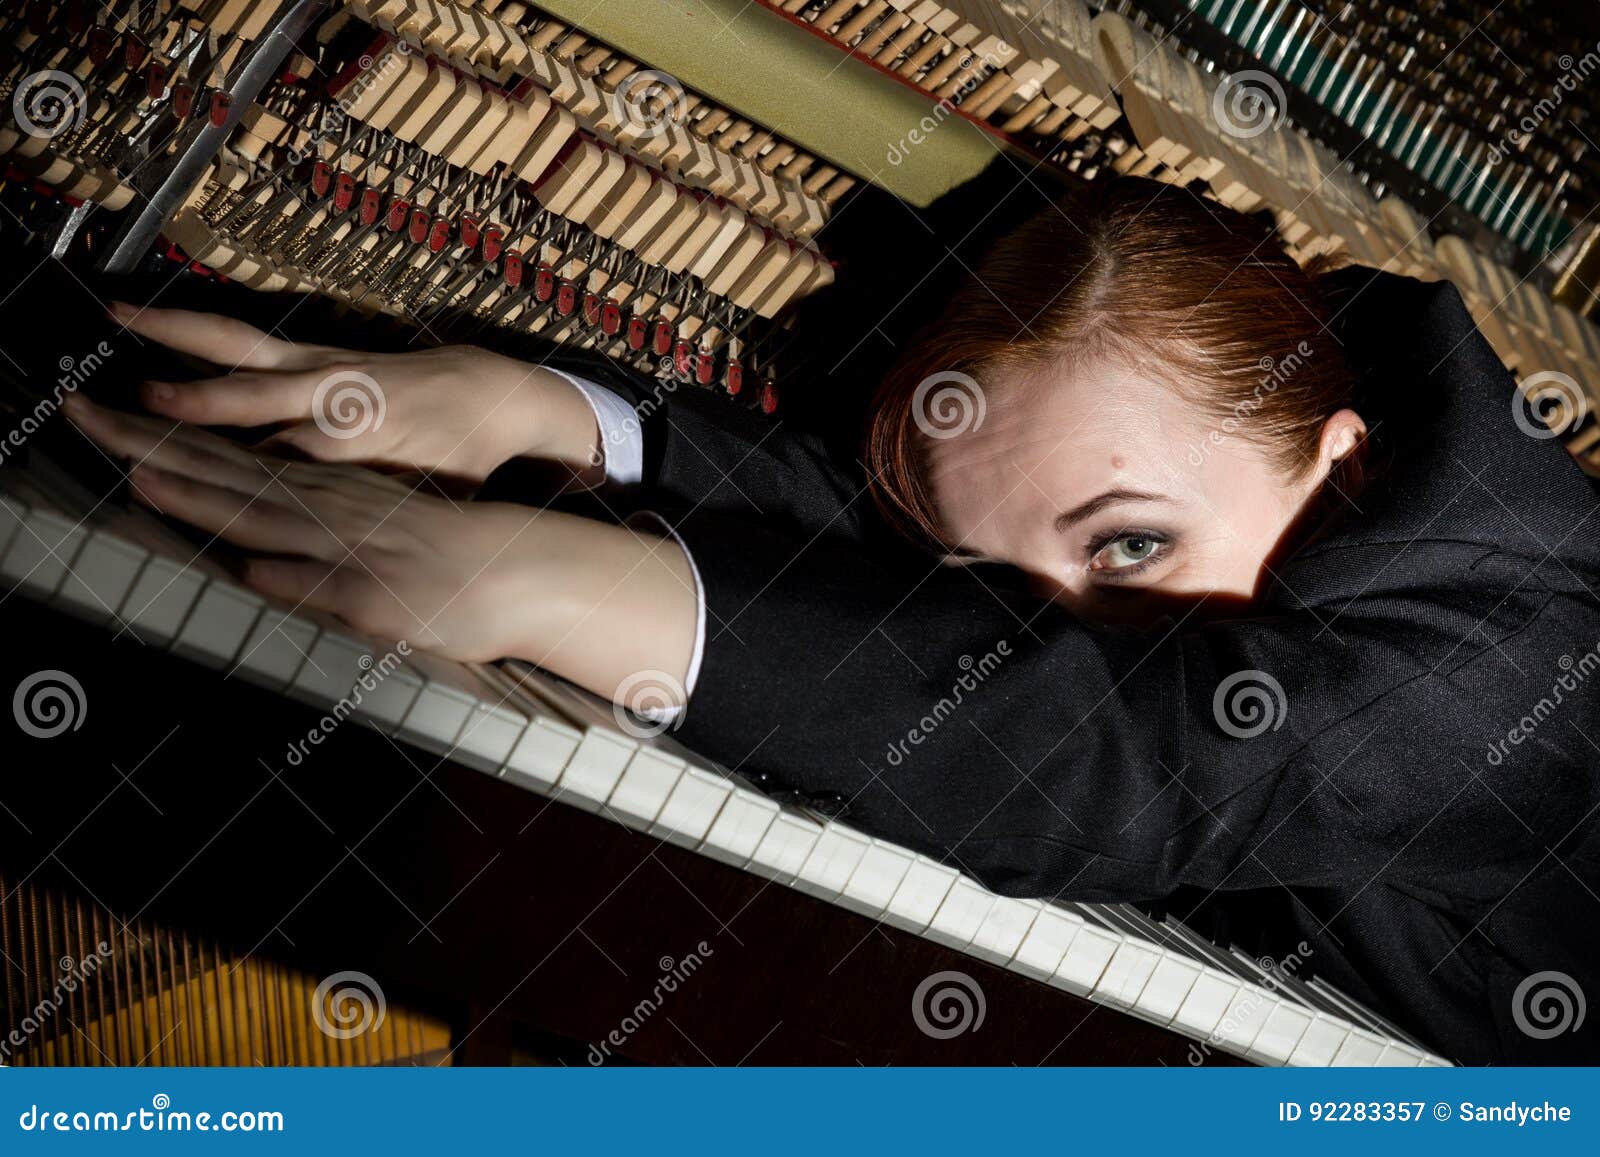 female musician dressed in a man`s suit lies on a piano keyboard